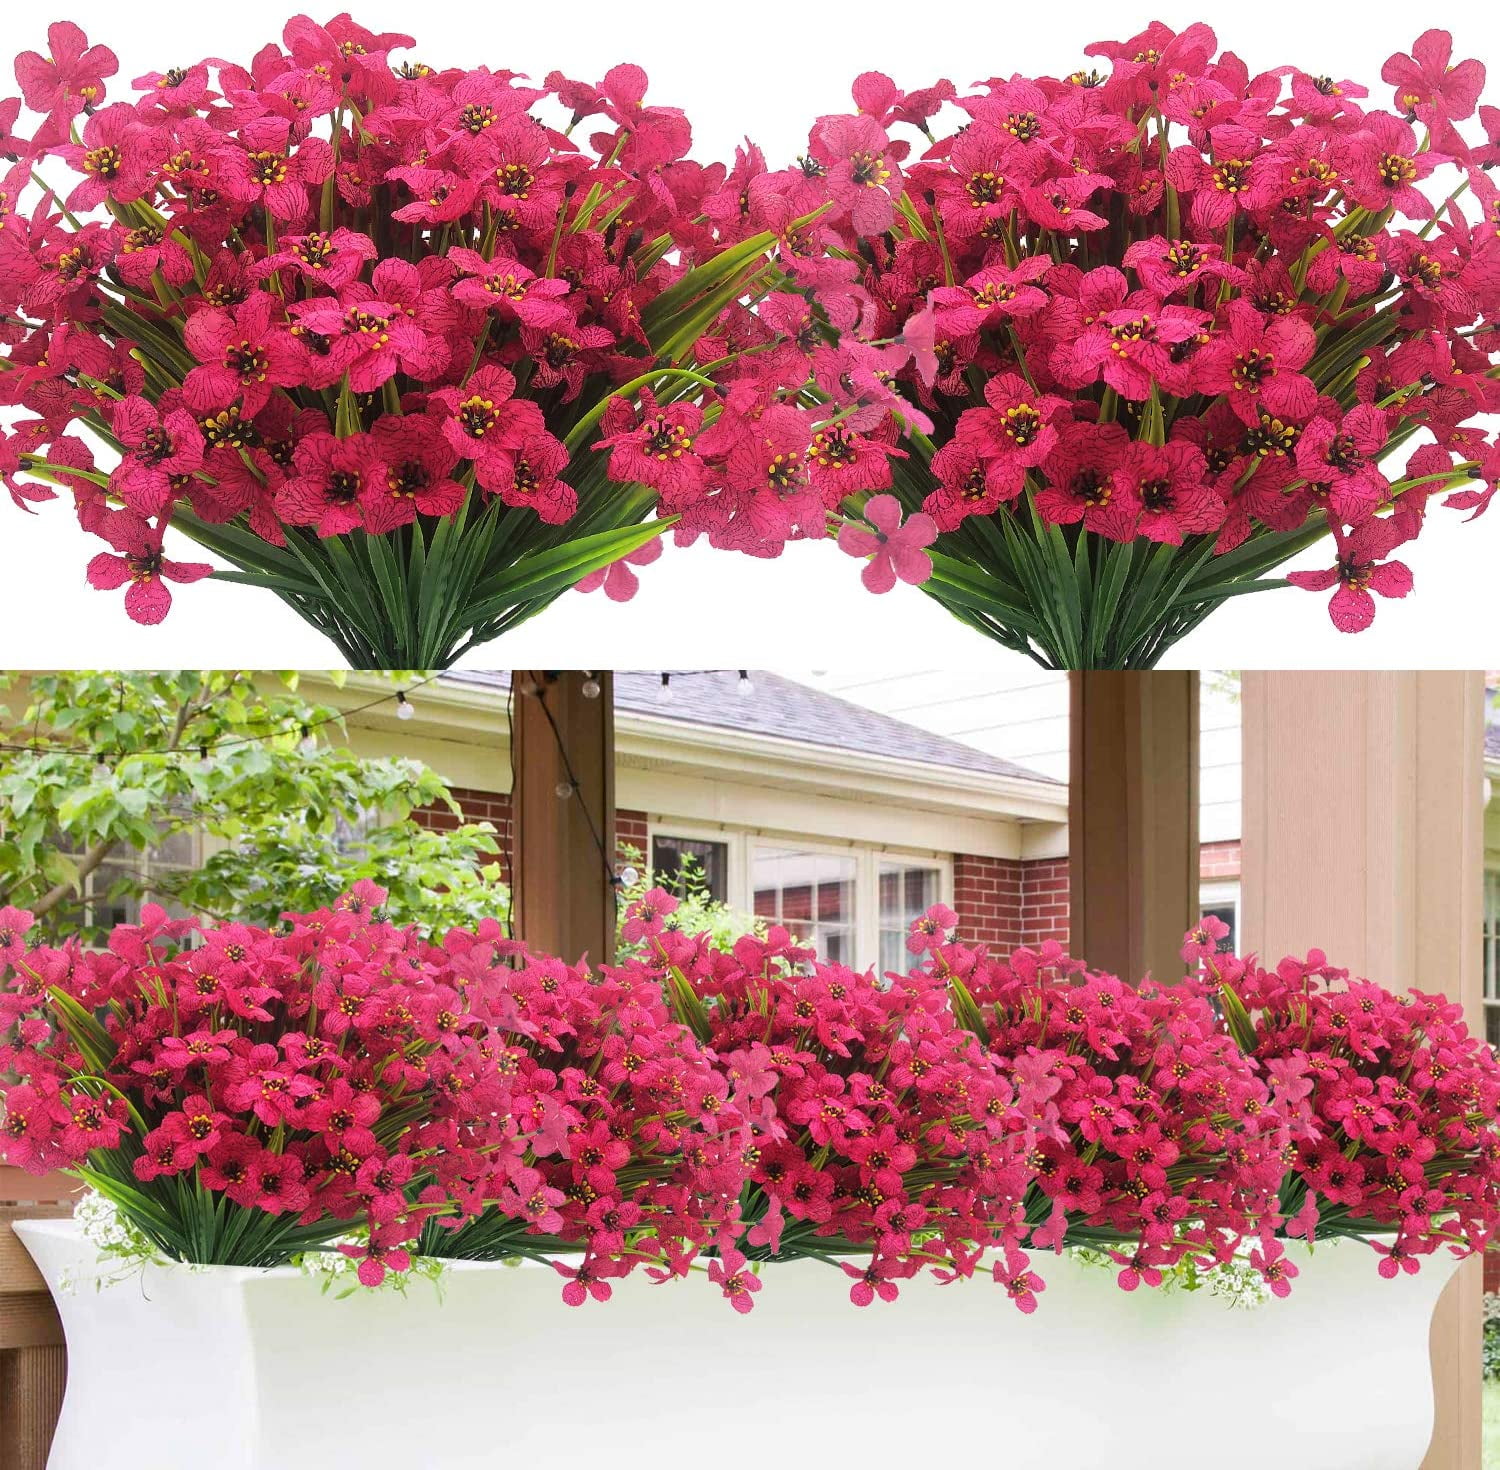 Plastic Artificial Fake-Flowers Plant Pot Outdoor Home Office Wedding Decor Gift